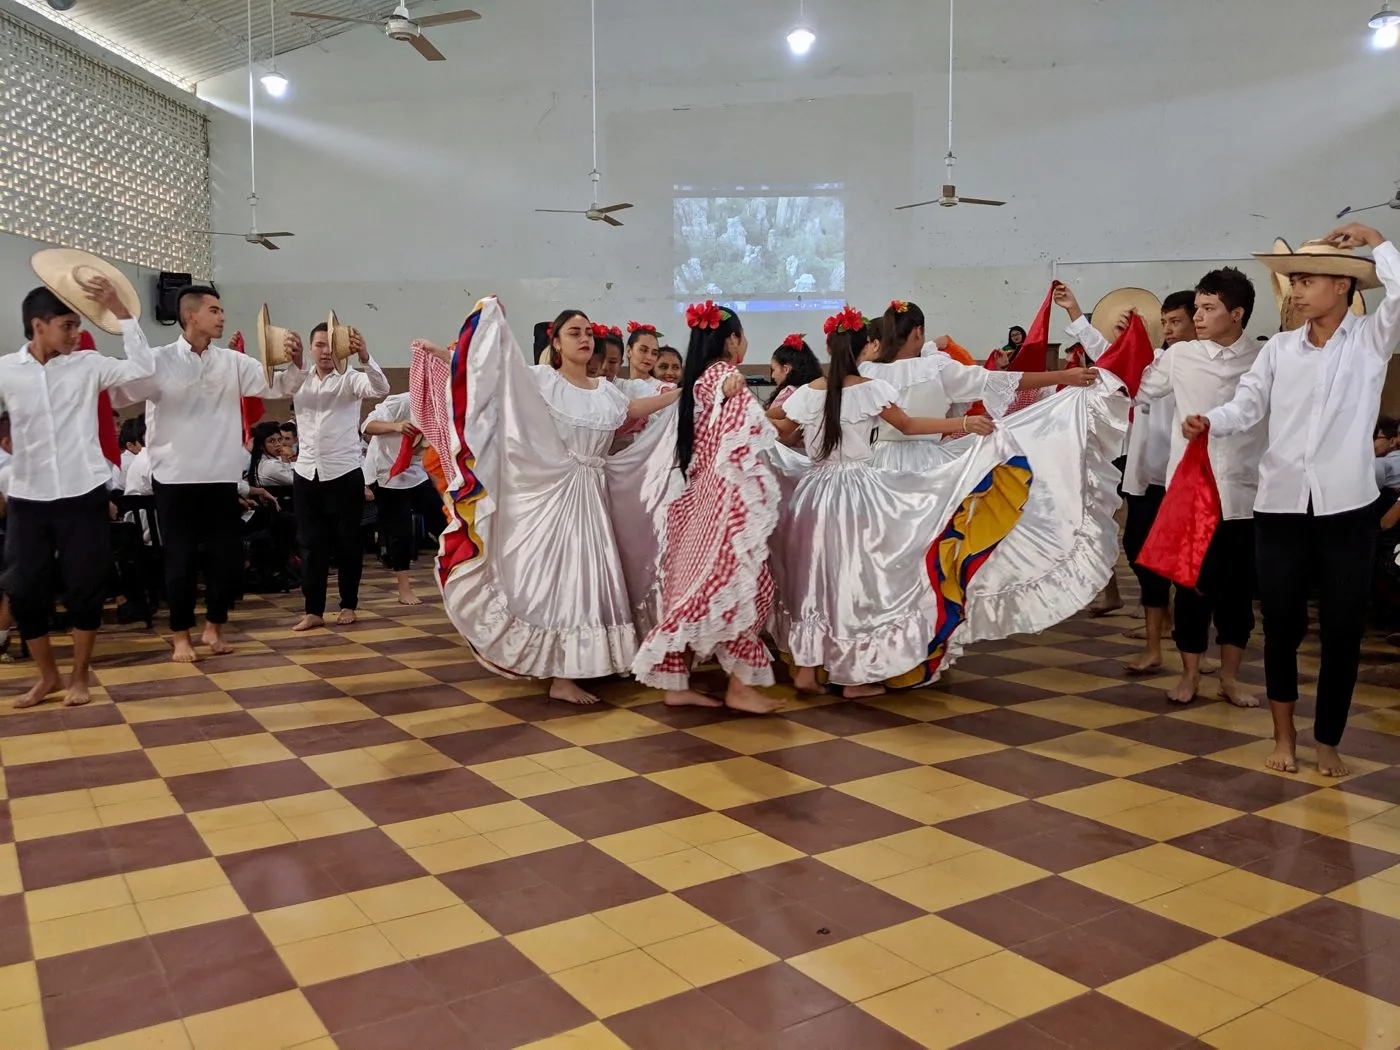 A cultural dance in Bogota performed by students.